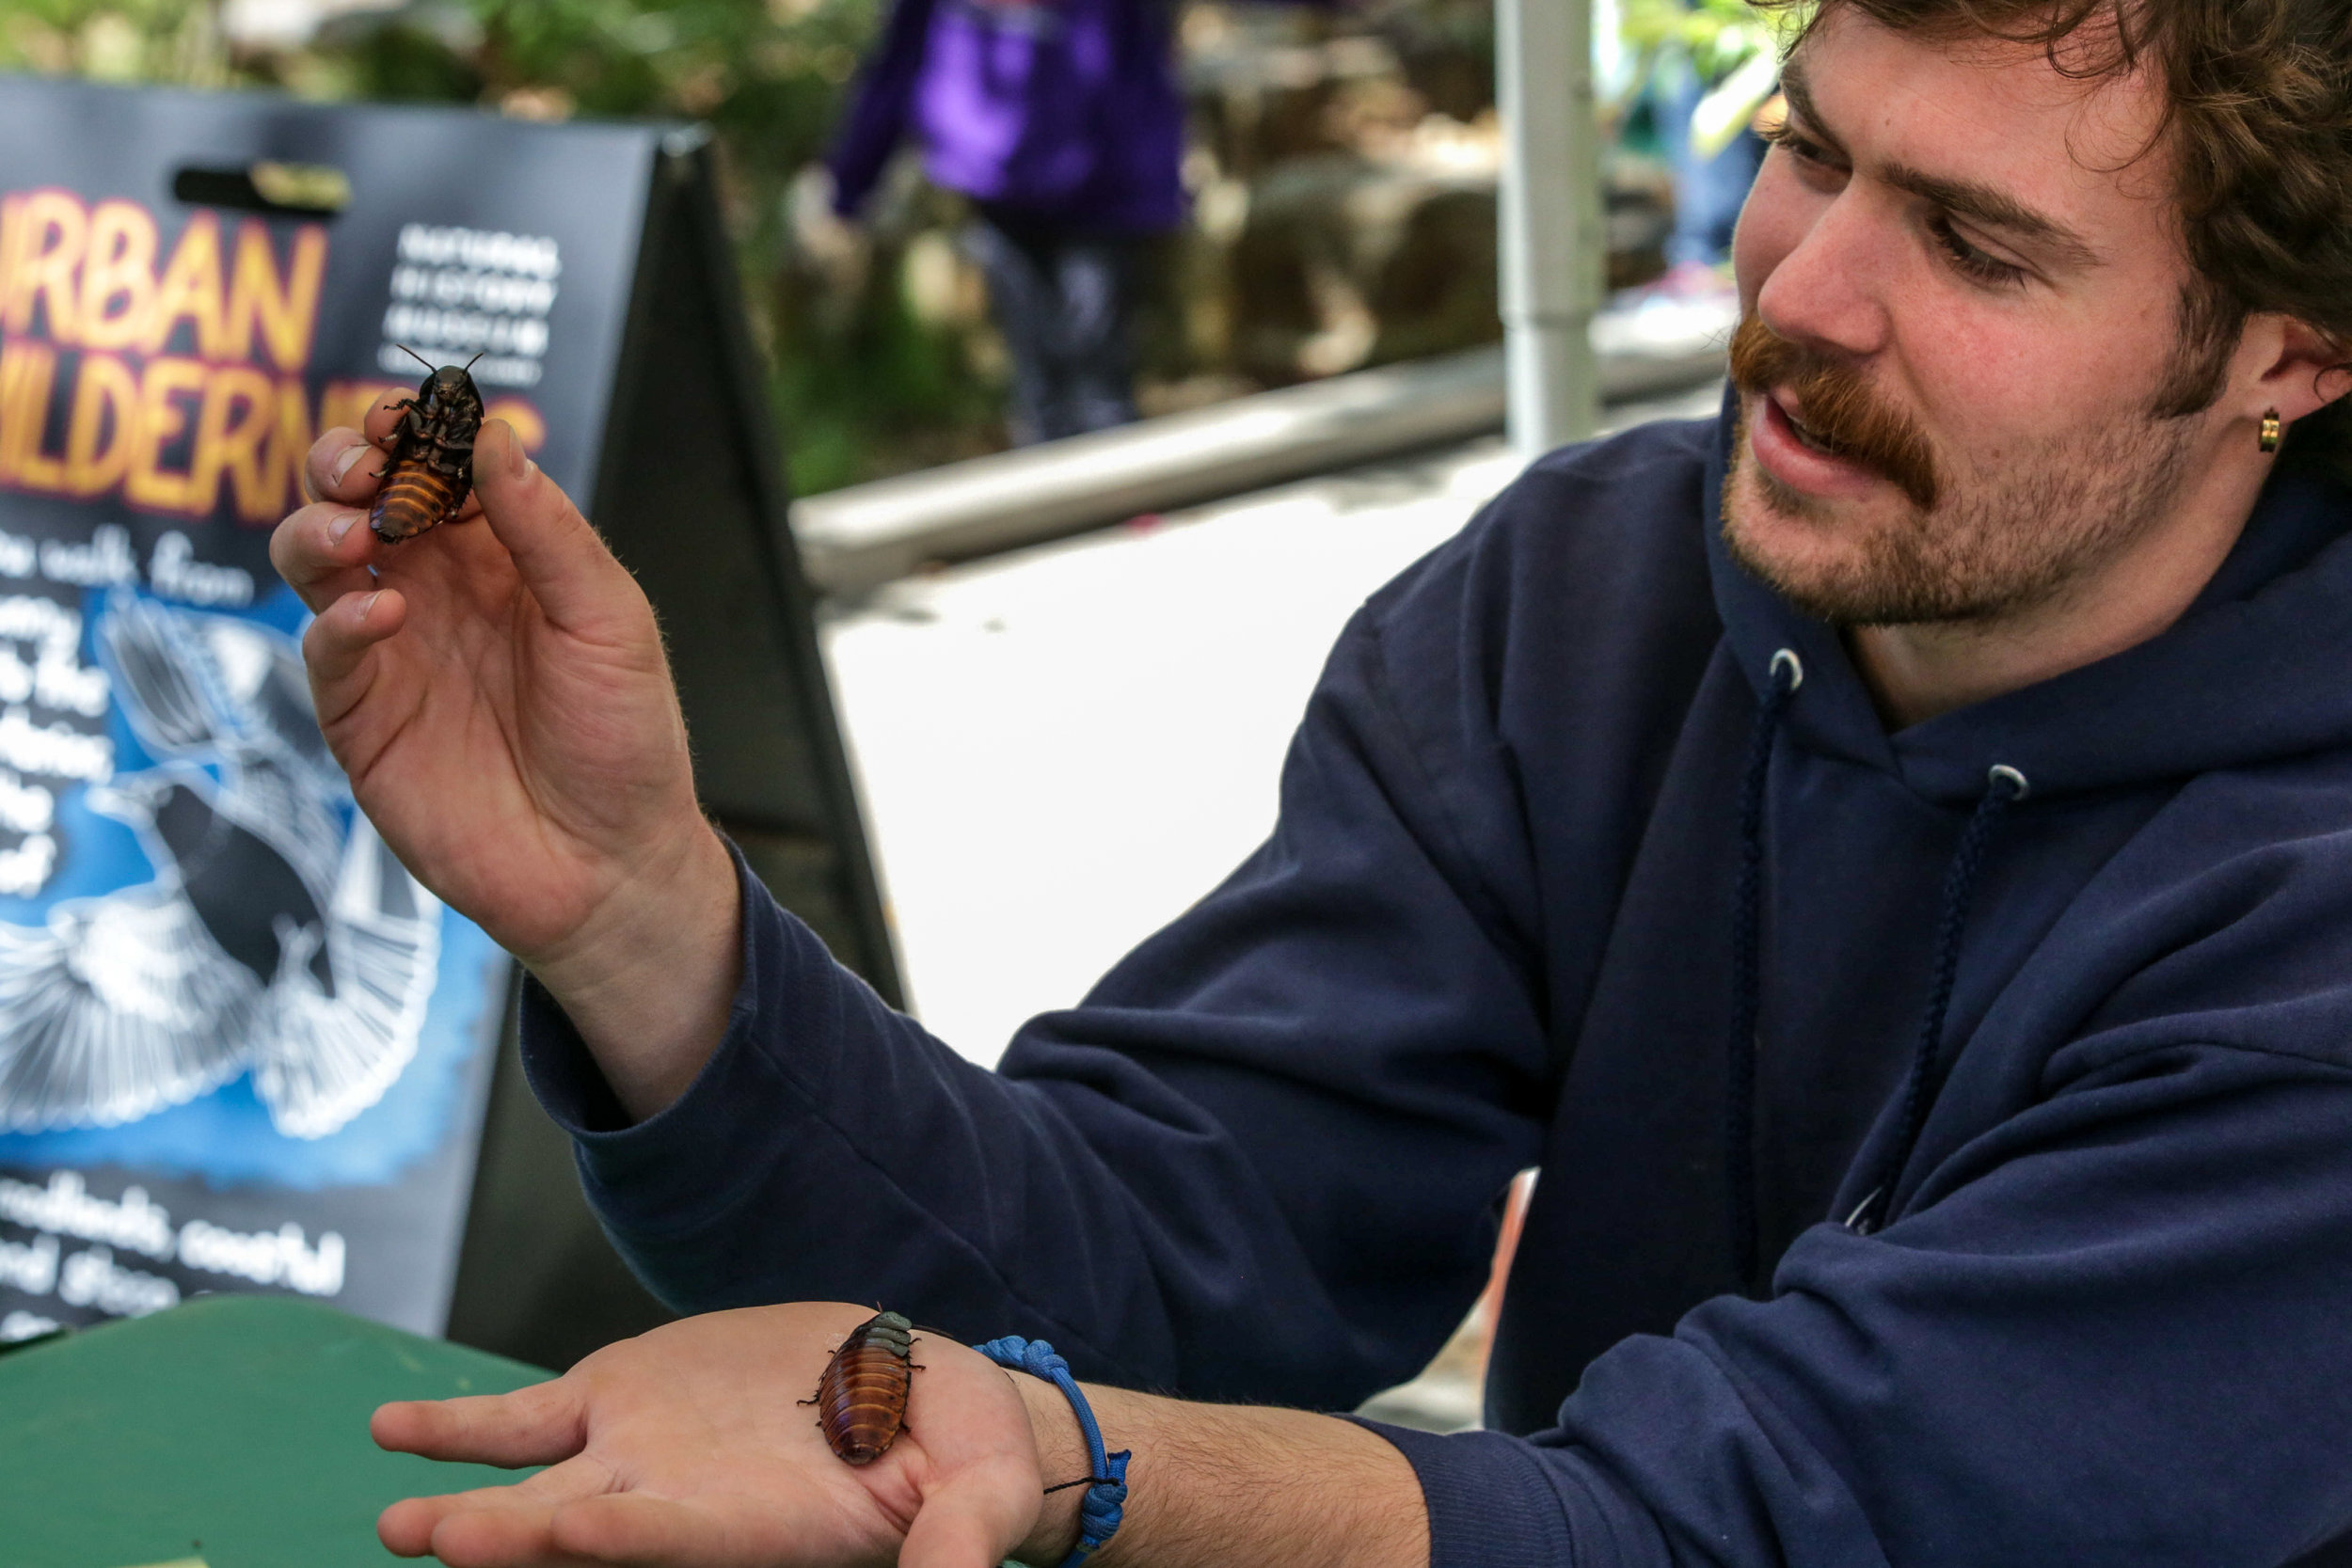  Urban Wildness shows Madagascar Hissing Coachroaches to the children attending the Los Angeles Nature Fest. Those and other creapy crawlers were on display at the Natural History Museum on the University of Southern California campus, Los Angeles, C